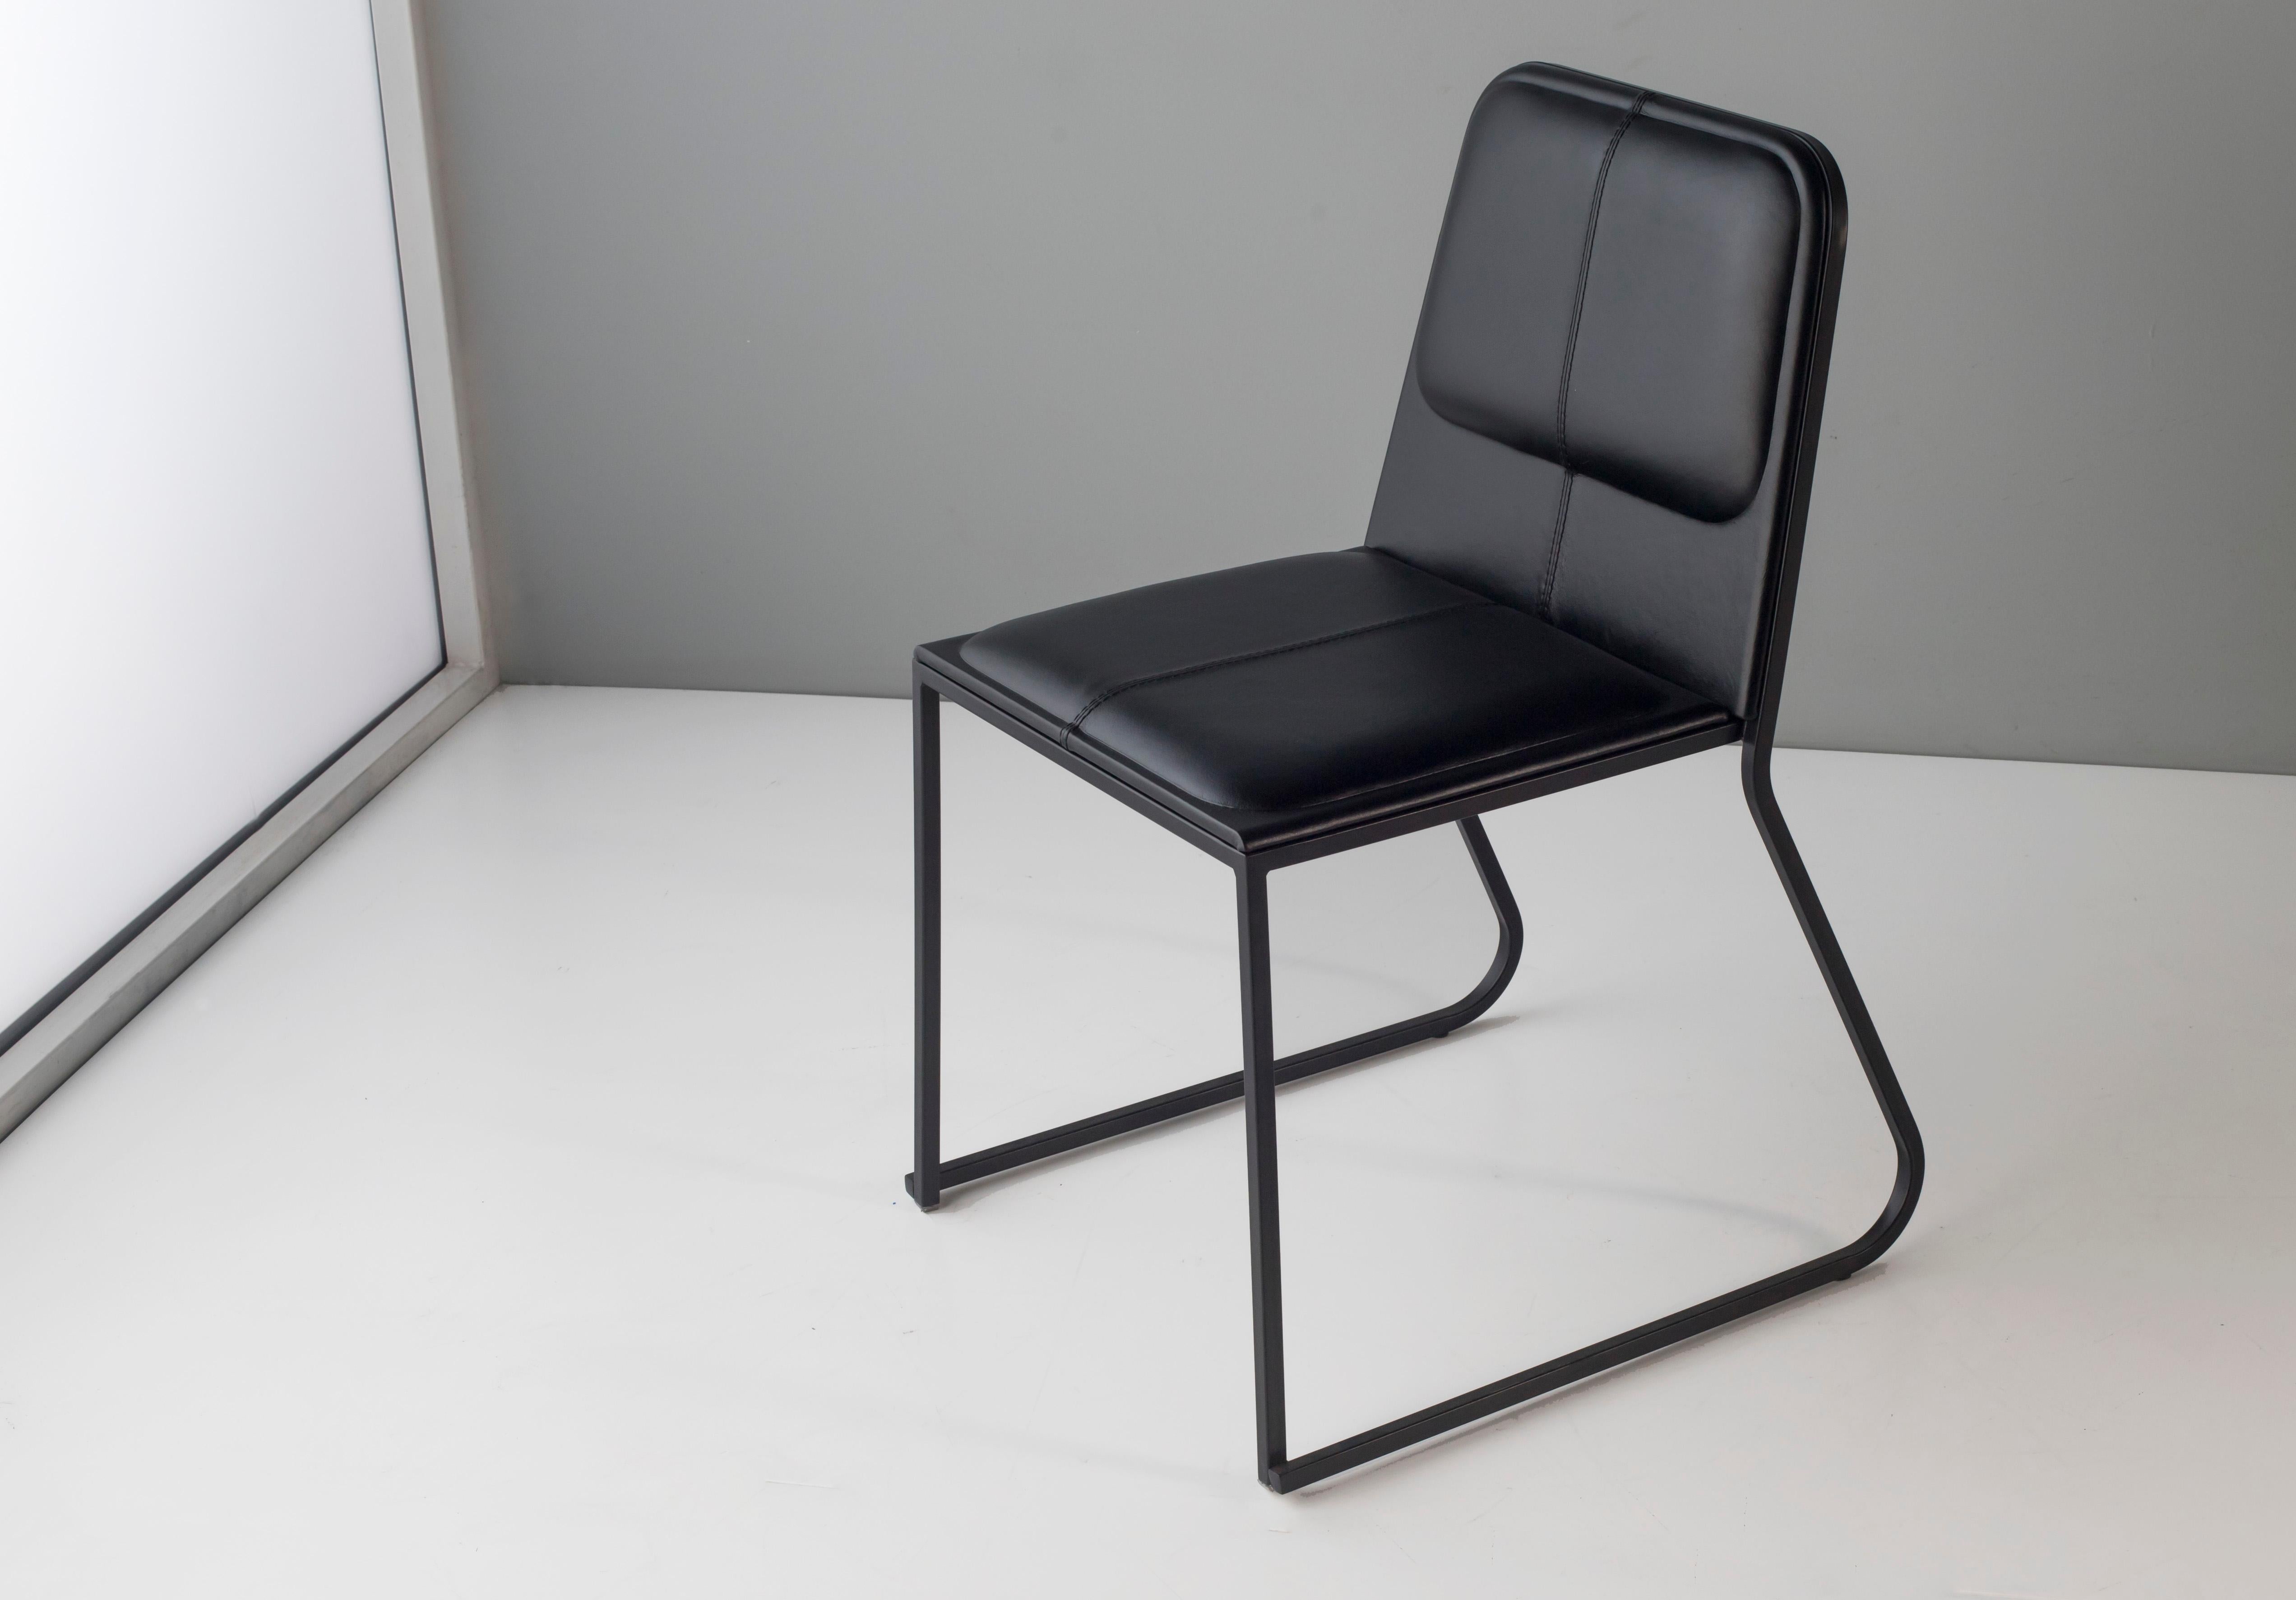 Bora Chair by Doimo Brasil
Dimensions: W 56 x D 53 x H 81 cm 
Materials: Metal chair with upholstered seat.


With the intention of providing good taste and personality, Doimo deciphers trends and follows the evolution of man and his space. To this